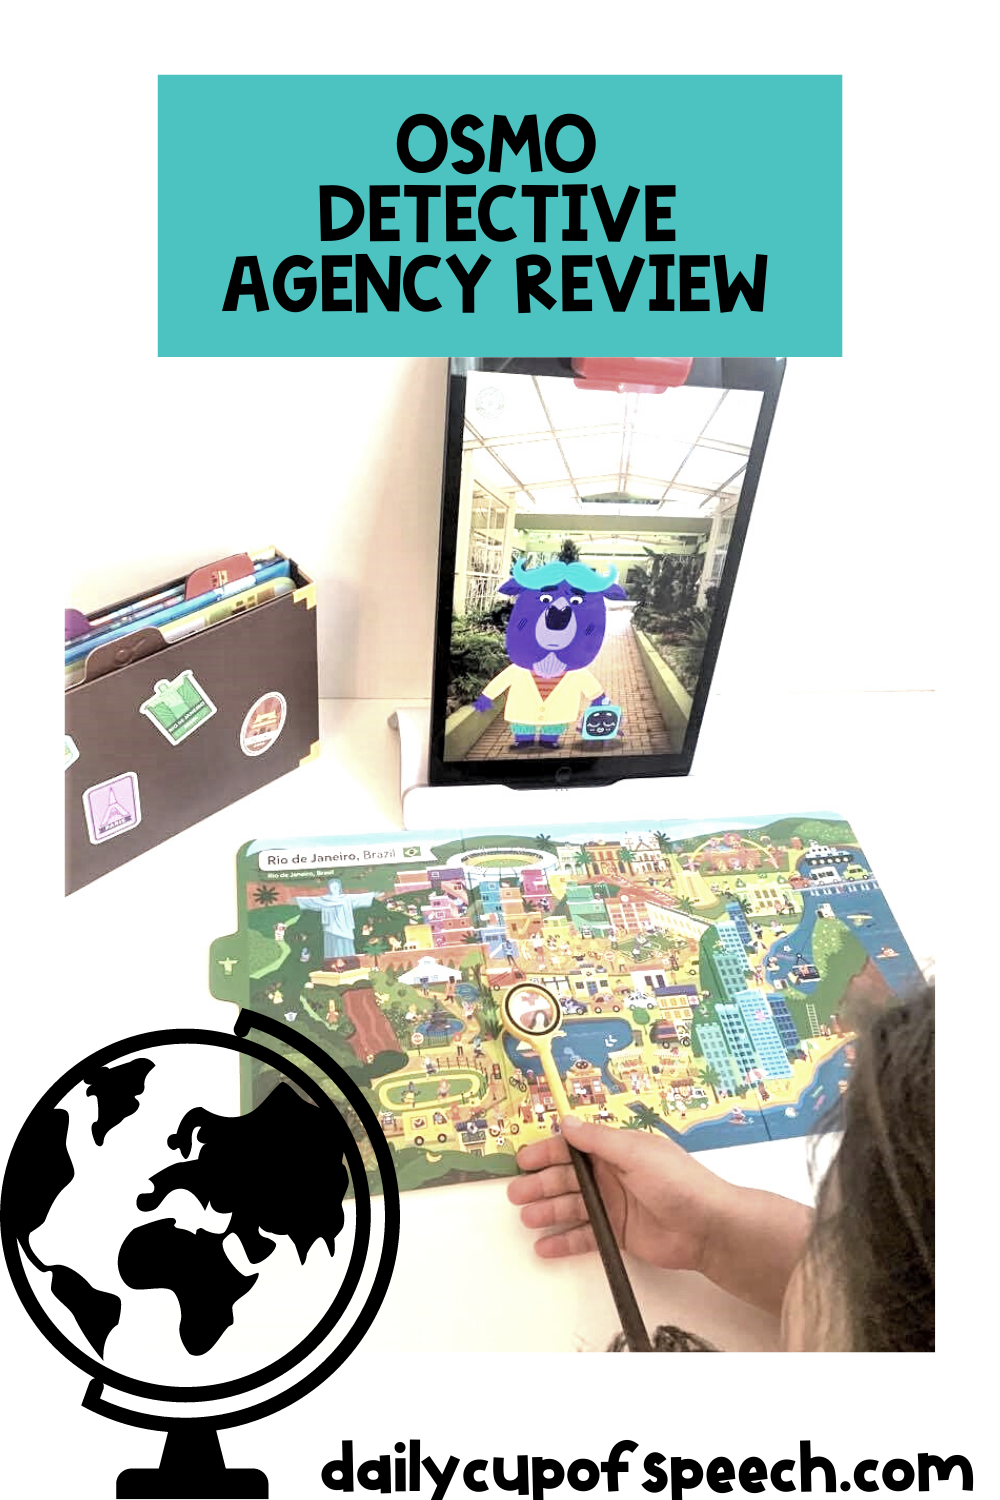 This image shows the Osmo Detective Agency game that is being reviewed. 